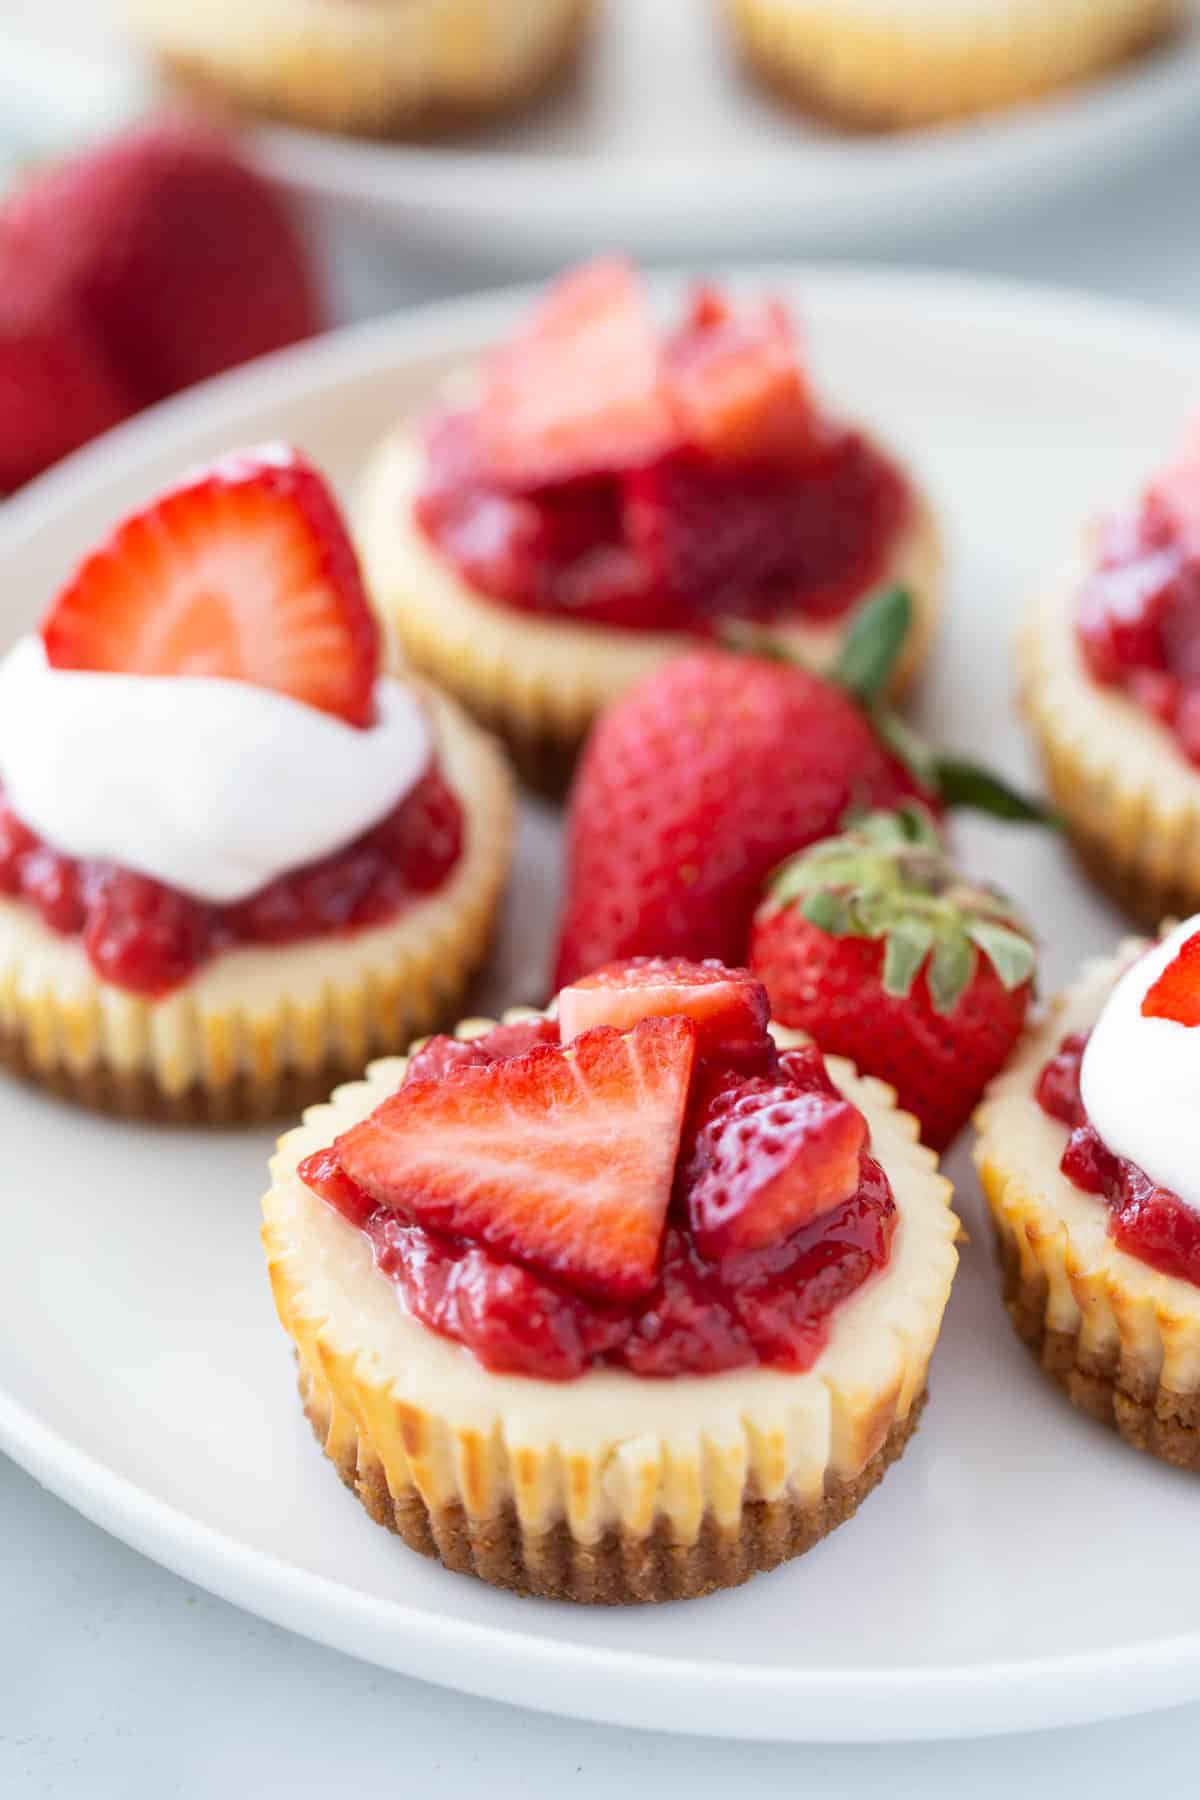 Close up image of Healthy Mini Cheesecakes with strawberry topping on a white plate. The ones in front are in focus, and the ones at the top of the image are out of focus.